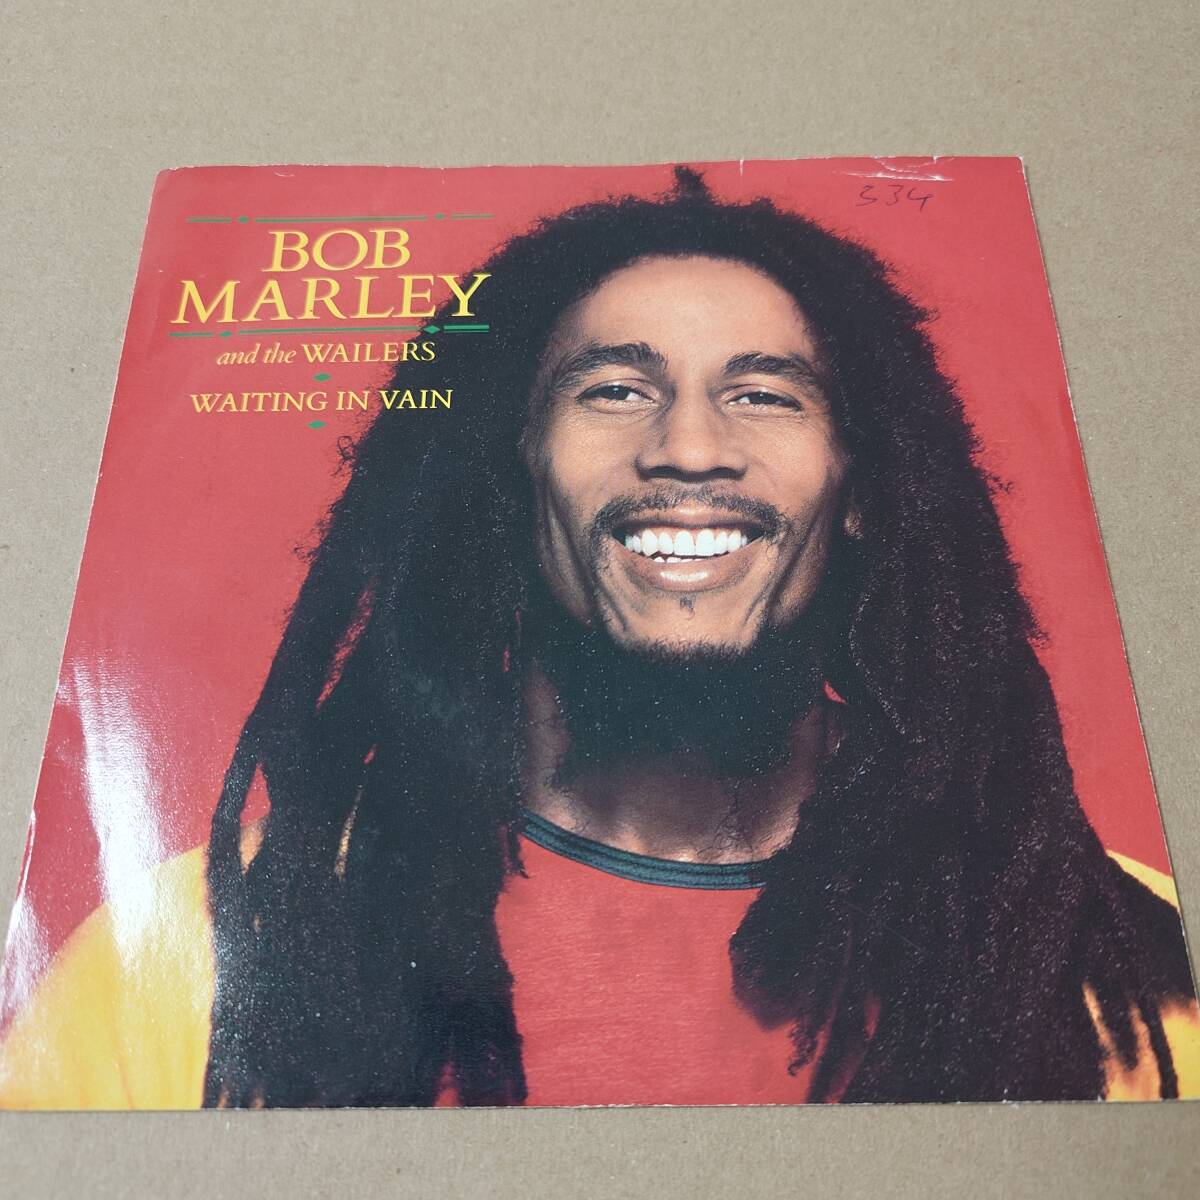 Bob Marley & The Wailers - Waiting In Vain / Blackman Redemption // Island Records 7inch / Roots_画像1